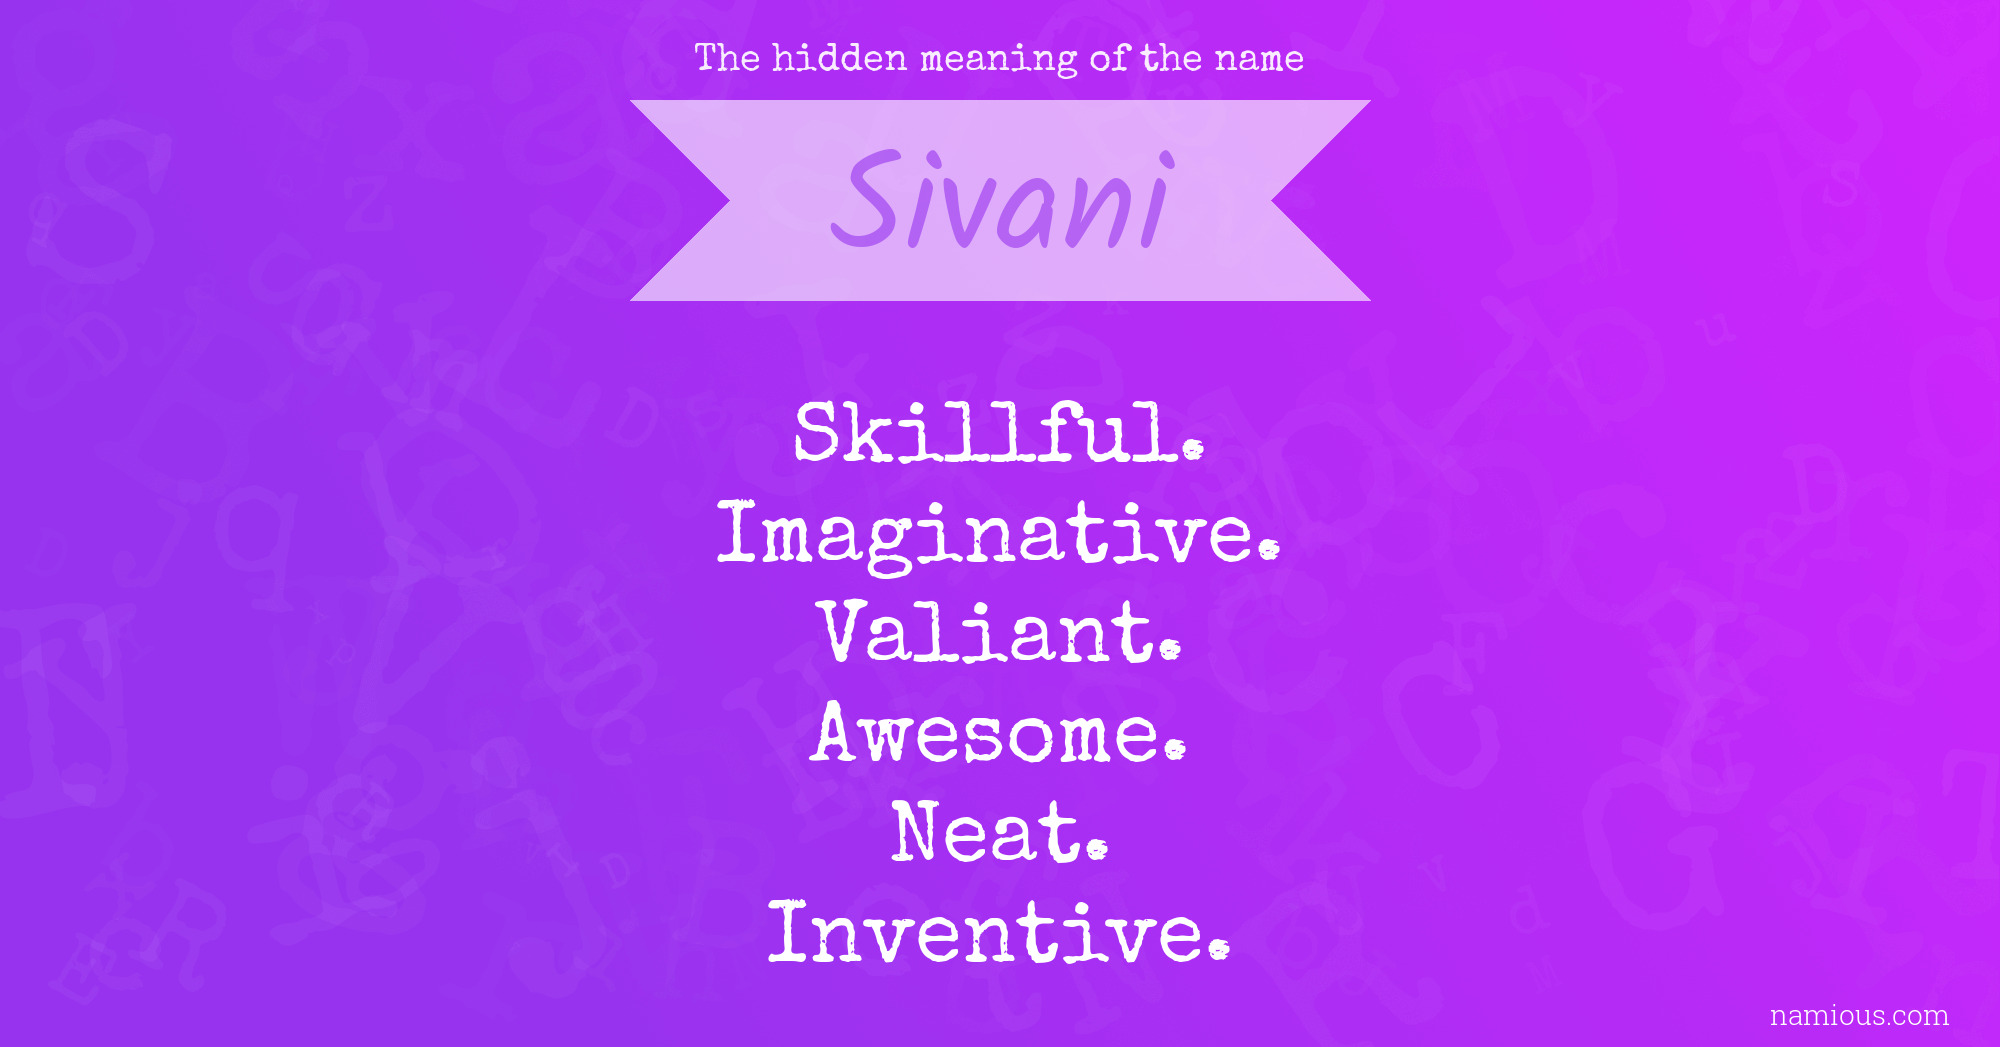 The hidden meaning of the name Sivani